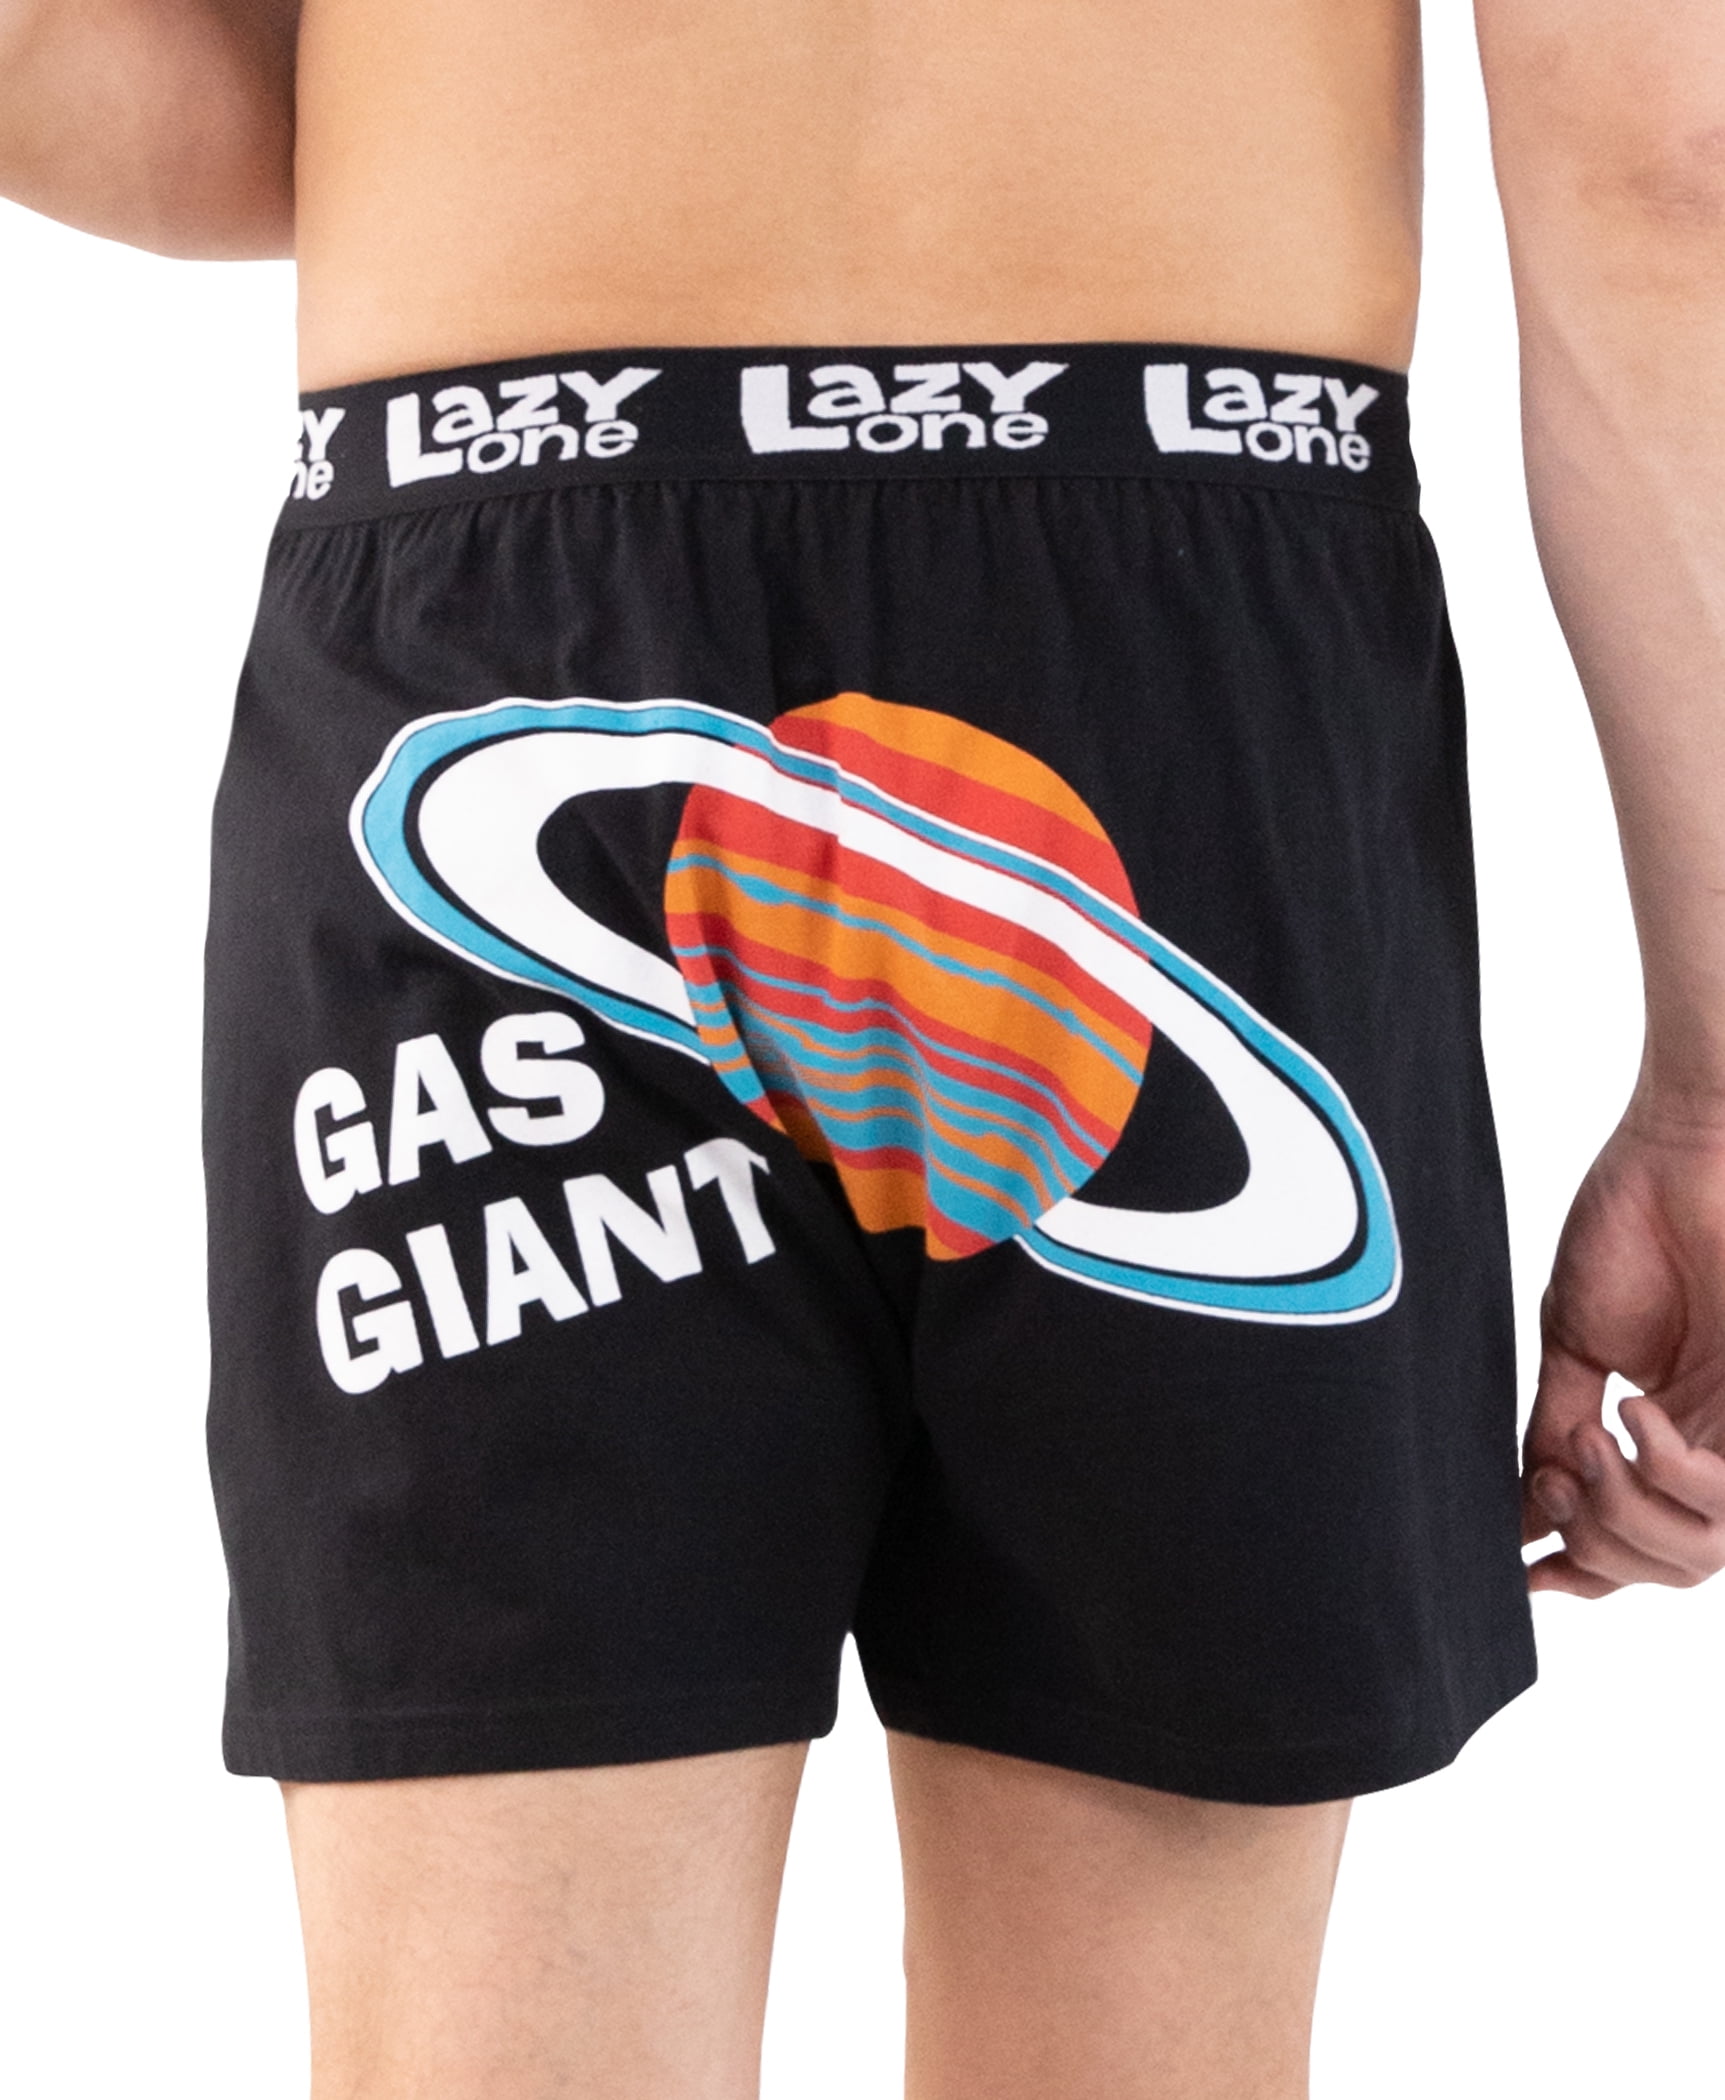 LazyOne Funny Boxers, Humorous Underwear, Gag Gifts for Men, Gas Giant -  